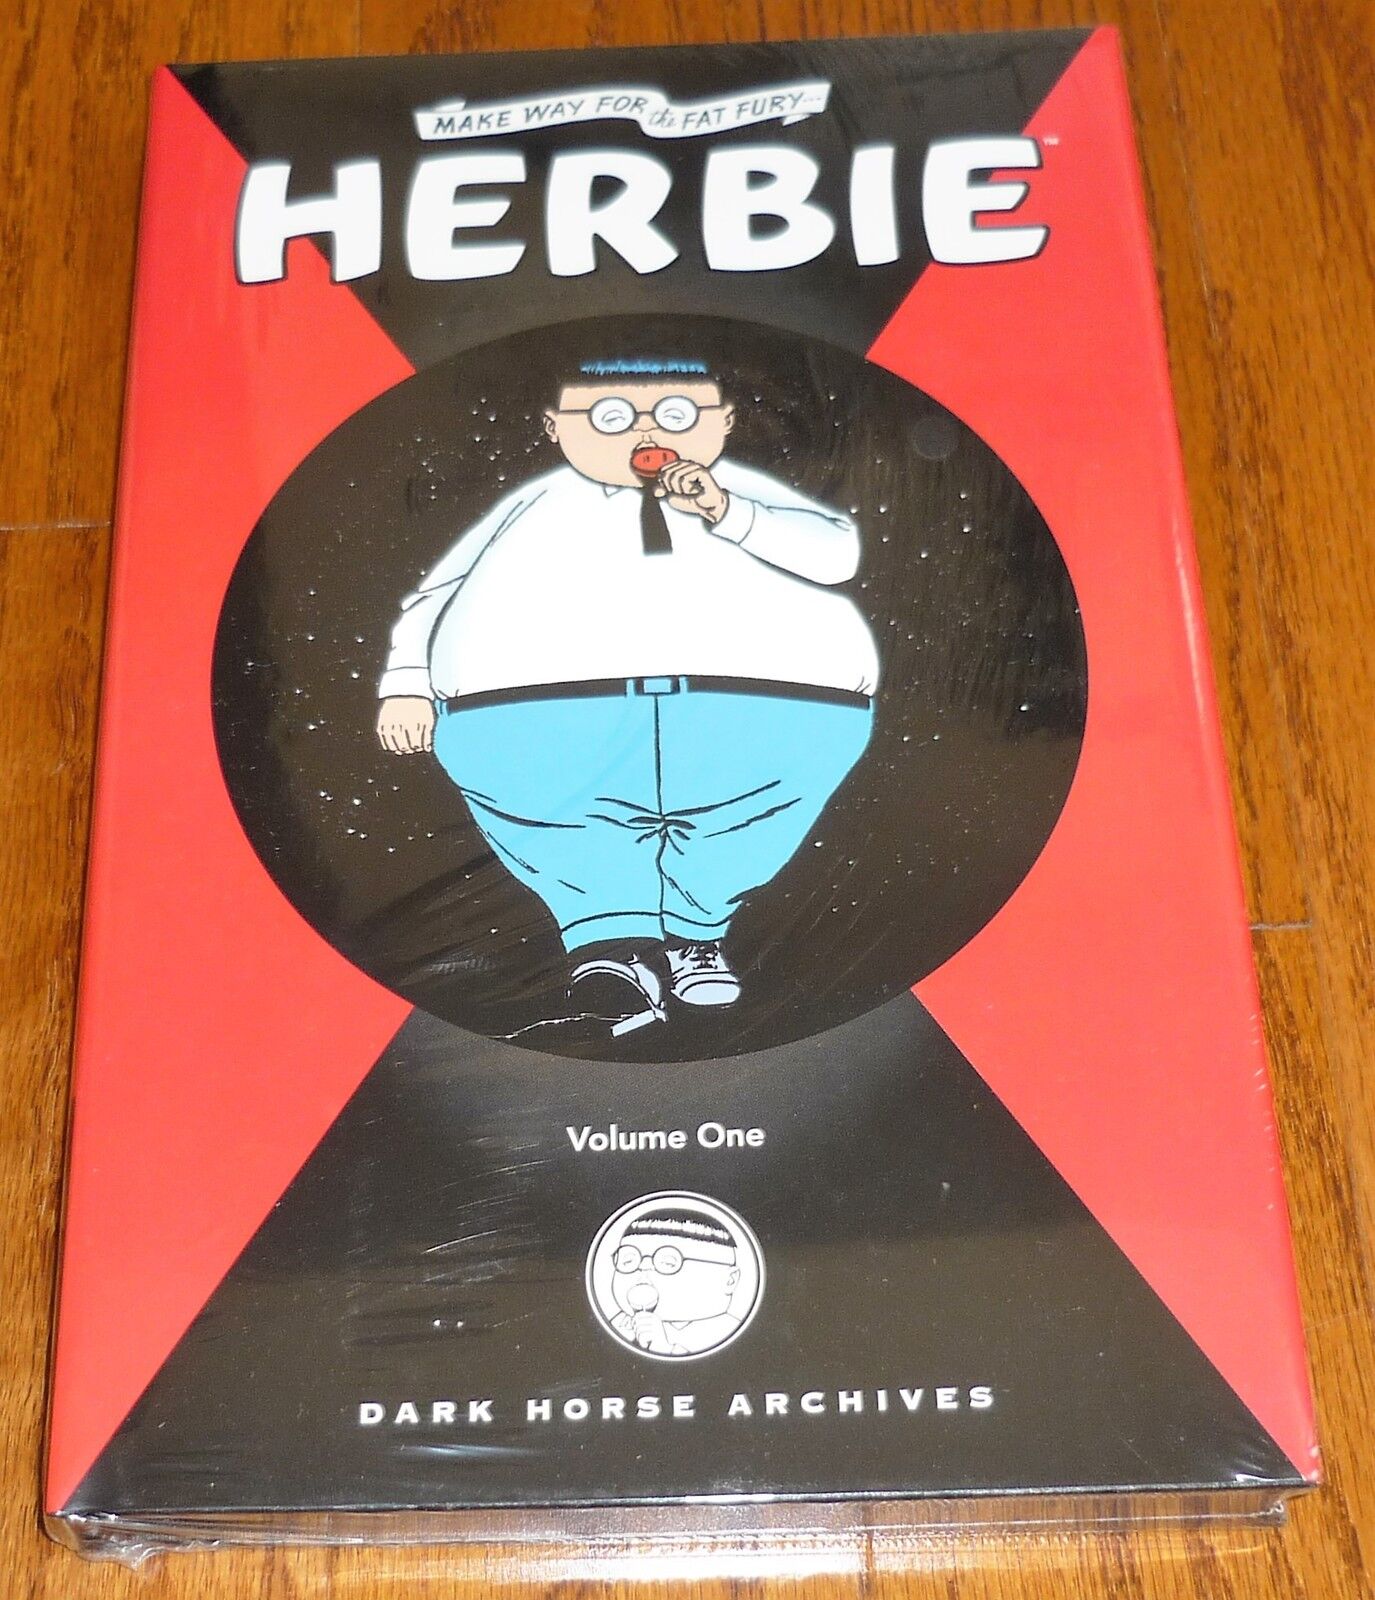 Herbie Archives Volume 1 SEALED ACG Dark Horse hardcover book The Fat Fury